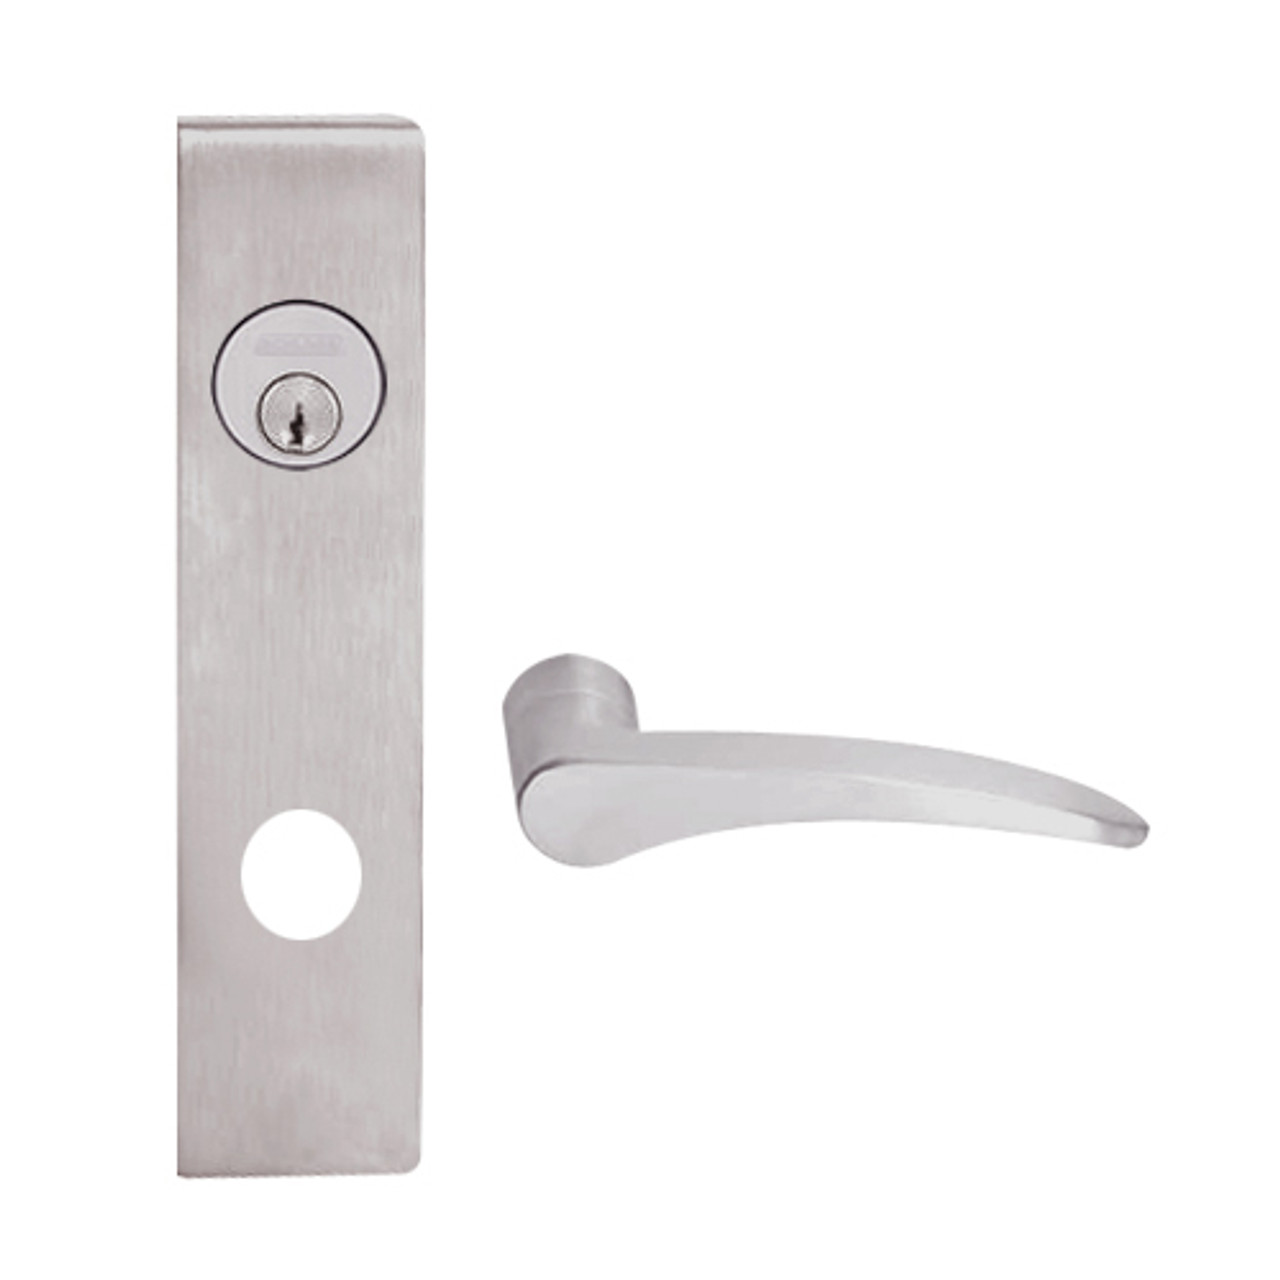 L9026P-12L-630-RH Schlage L Series Exit Lock with Cylinder Commercial Mortise Lock with 12 Cast Lever Design in Satin Stainless Steel